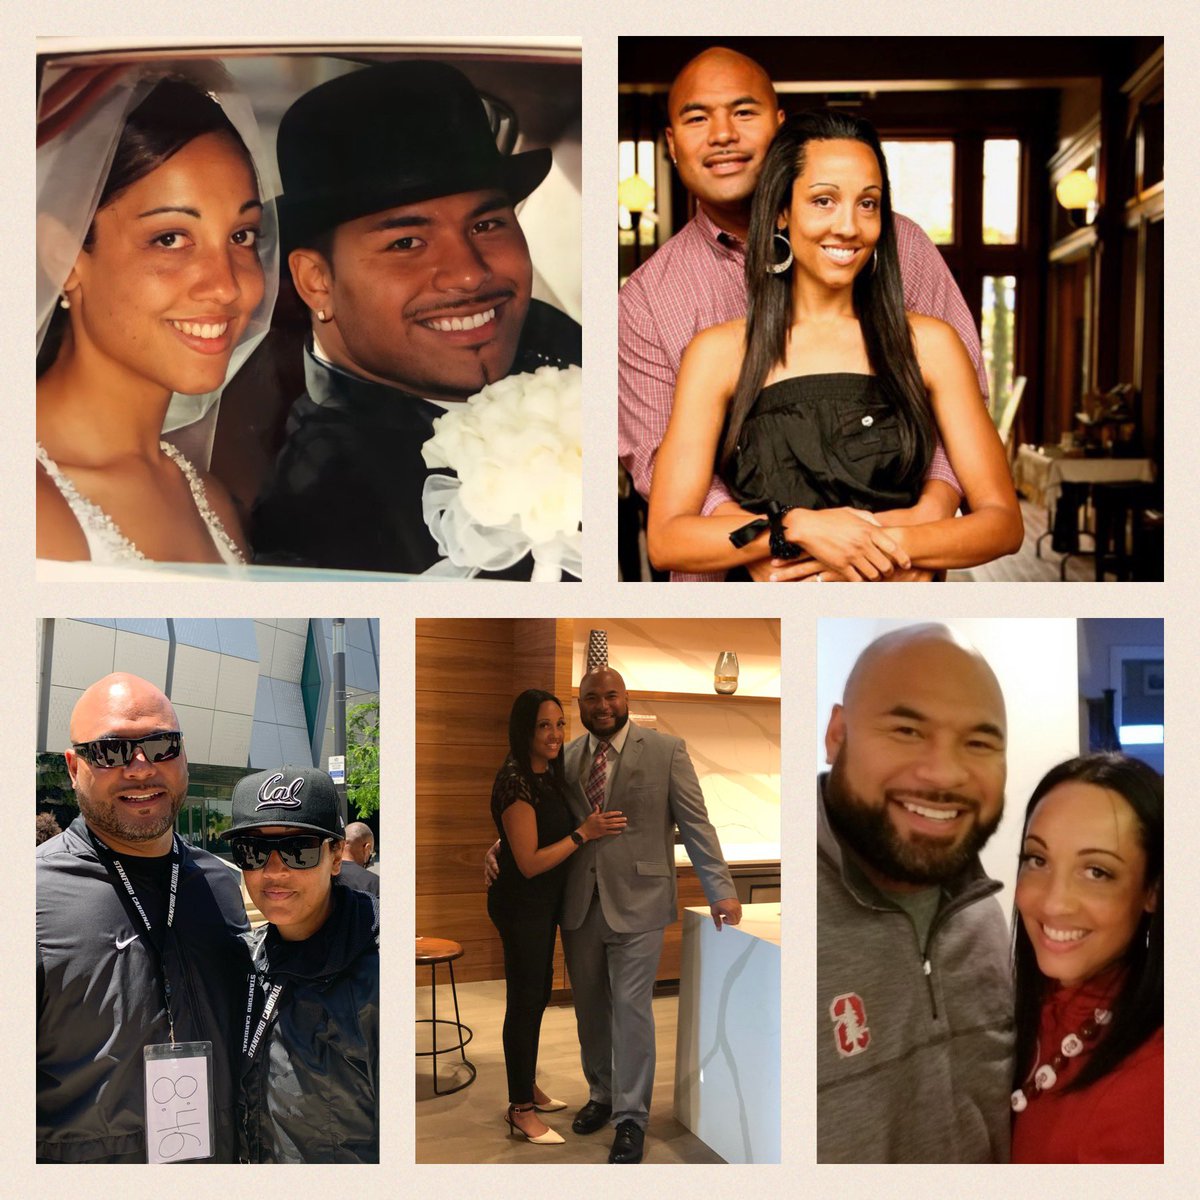 On this day, year 2000, I gave my life to this woman @Son1OneWonMom as she did for me, '..bone of my bone...flesh of my flesh..'. Alana, you are the epitome of God's love & grace for a wretch like me. Thank you for 21 years of marriage. Happy Anniversary, my Queen👑, my Love ❤️.